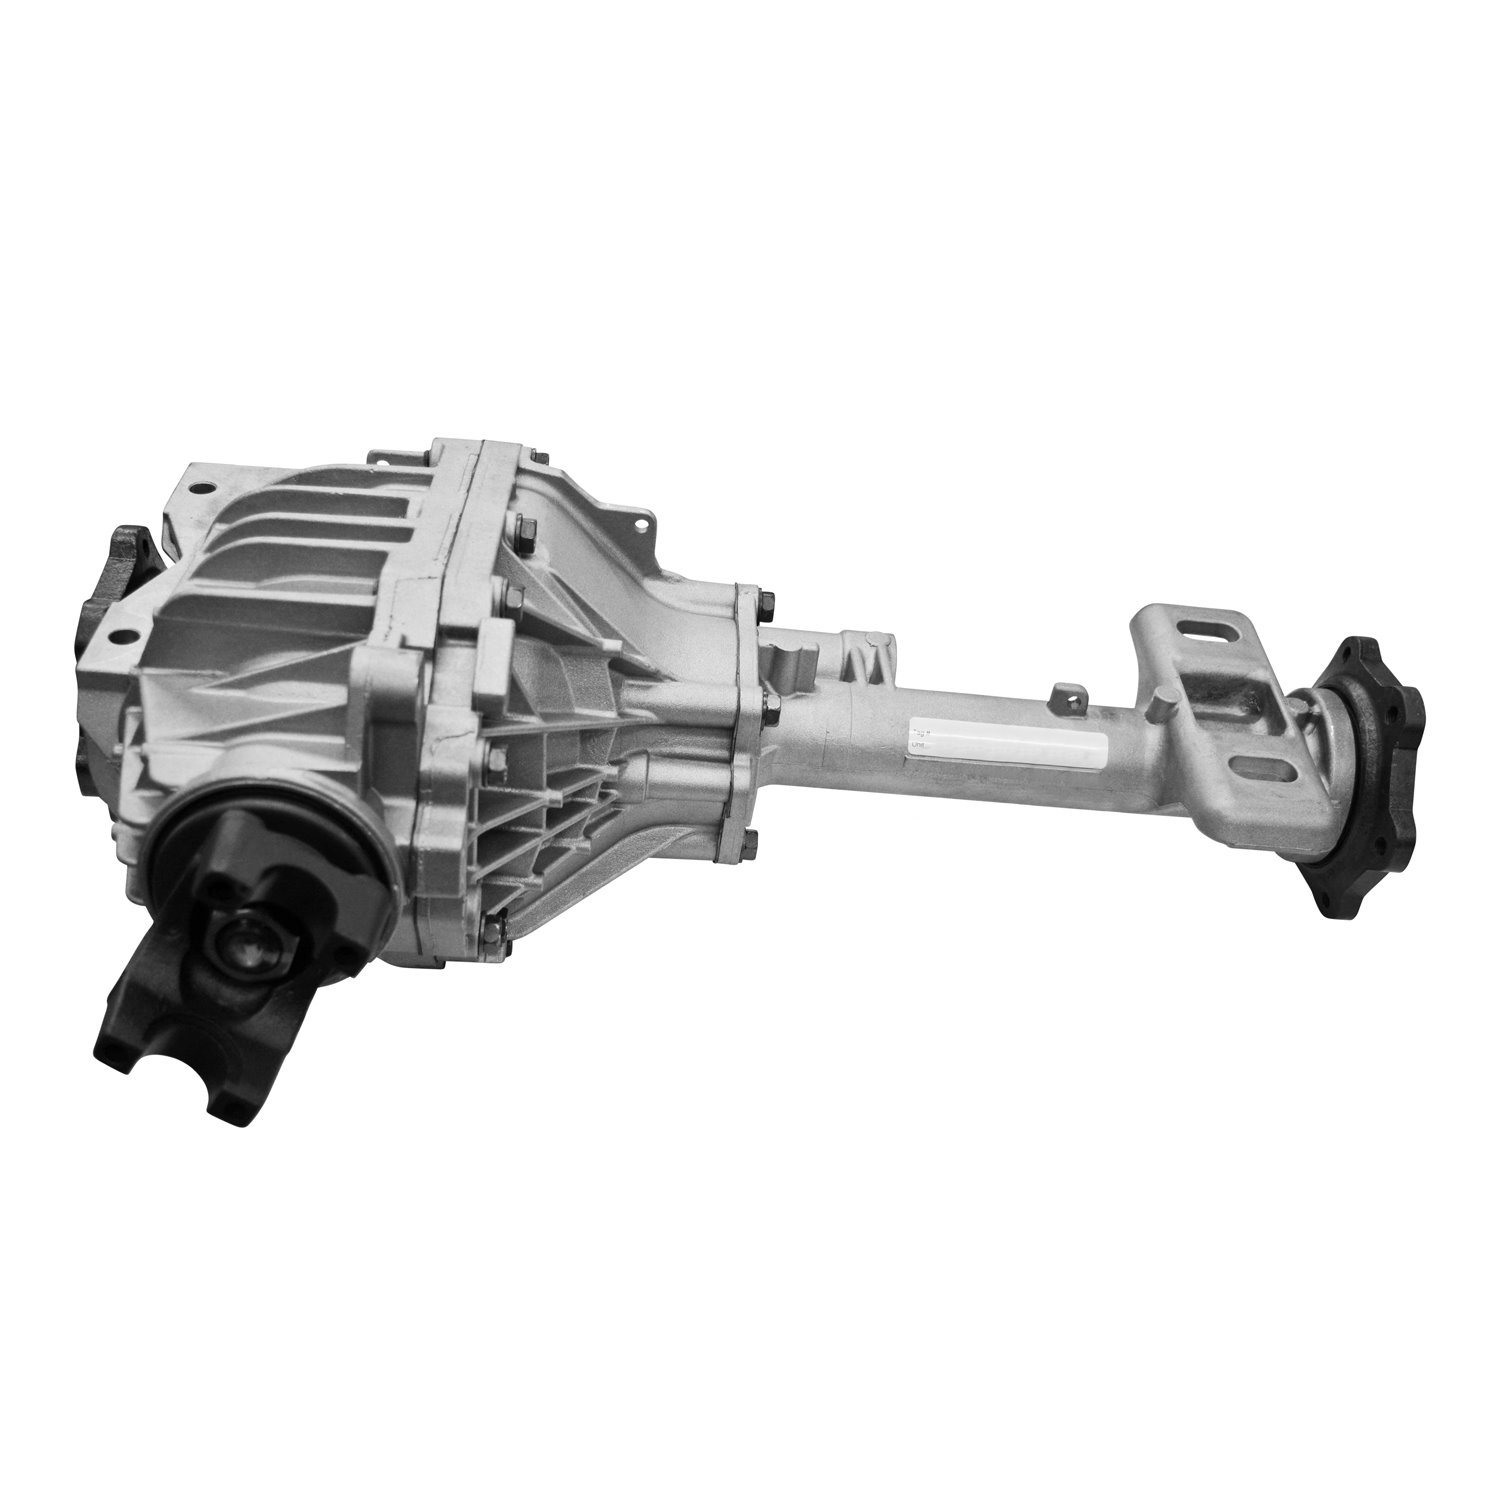 RAA440-1472X1 Front Axle Assembly, Chrysler 8.25 IFS, '13-'19 GM 1500 Pickup ('19 Classic) & '13-'20 Suv, 3.73 Ratio, Open